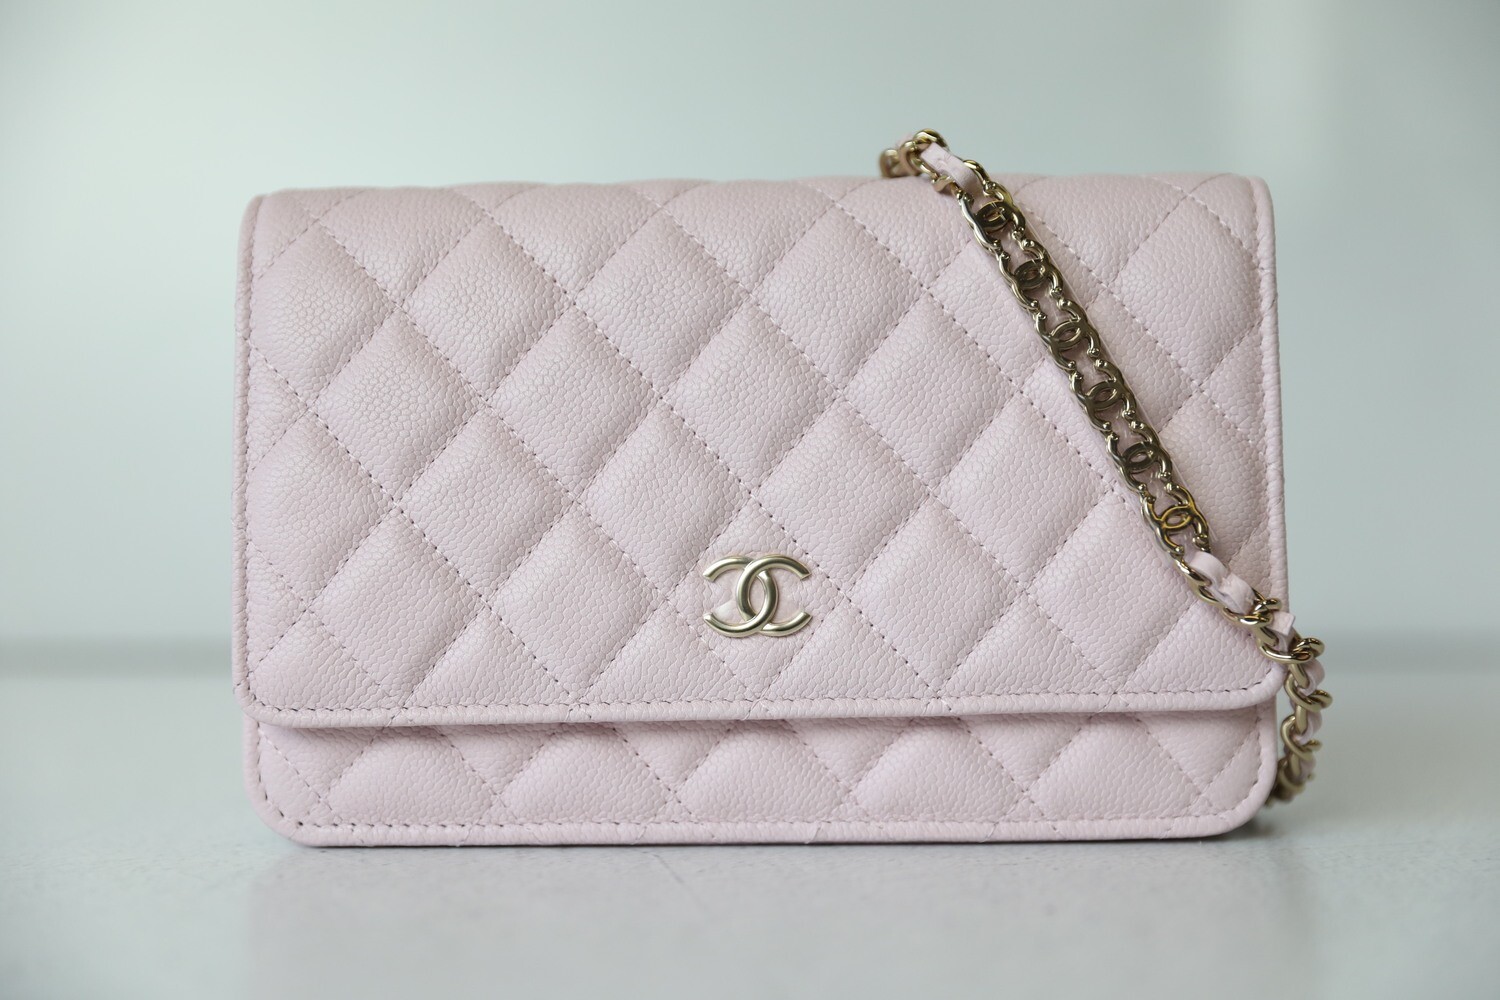 Chanel Wallet on Chain with Top Handle, Pink Caviar with Gold Hardware, New  in Box WA001